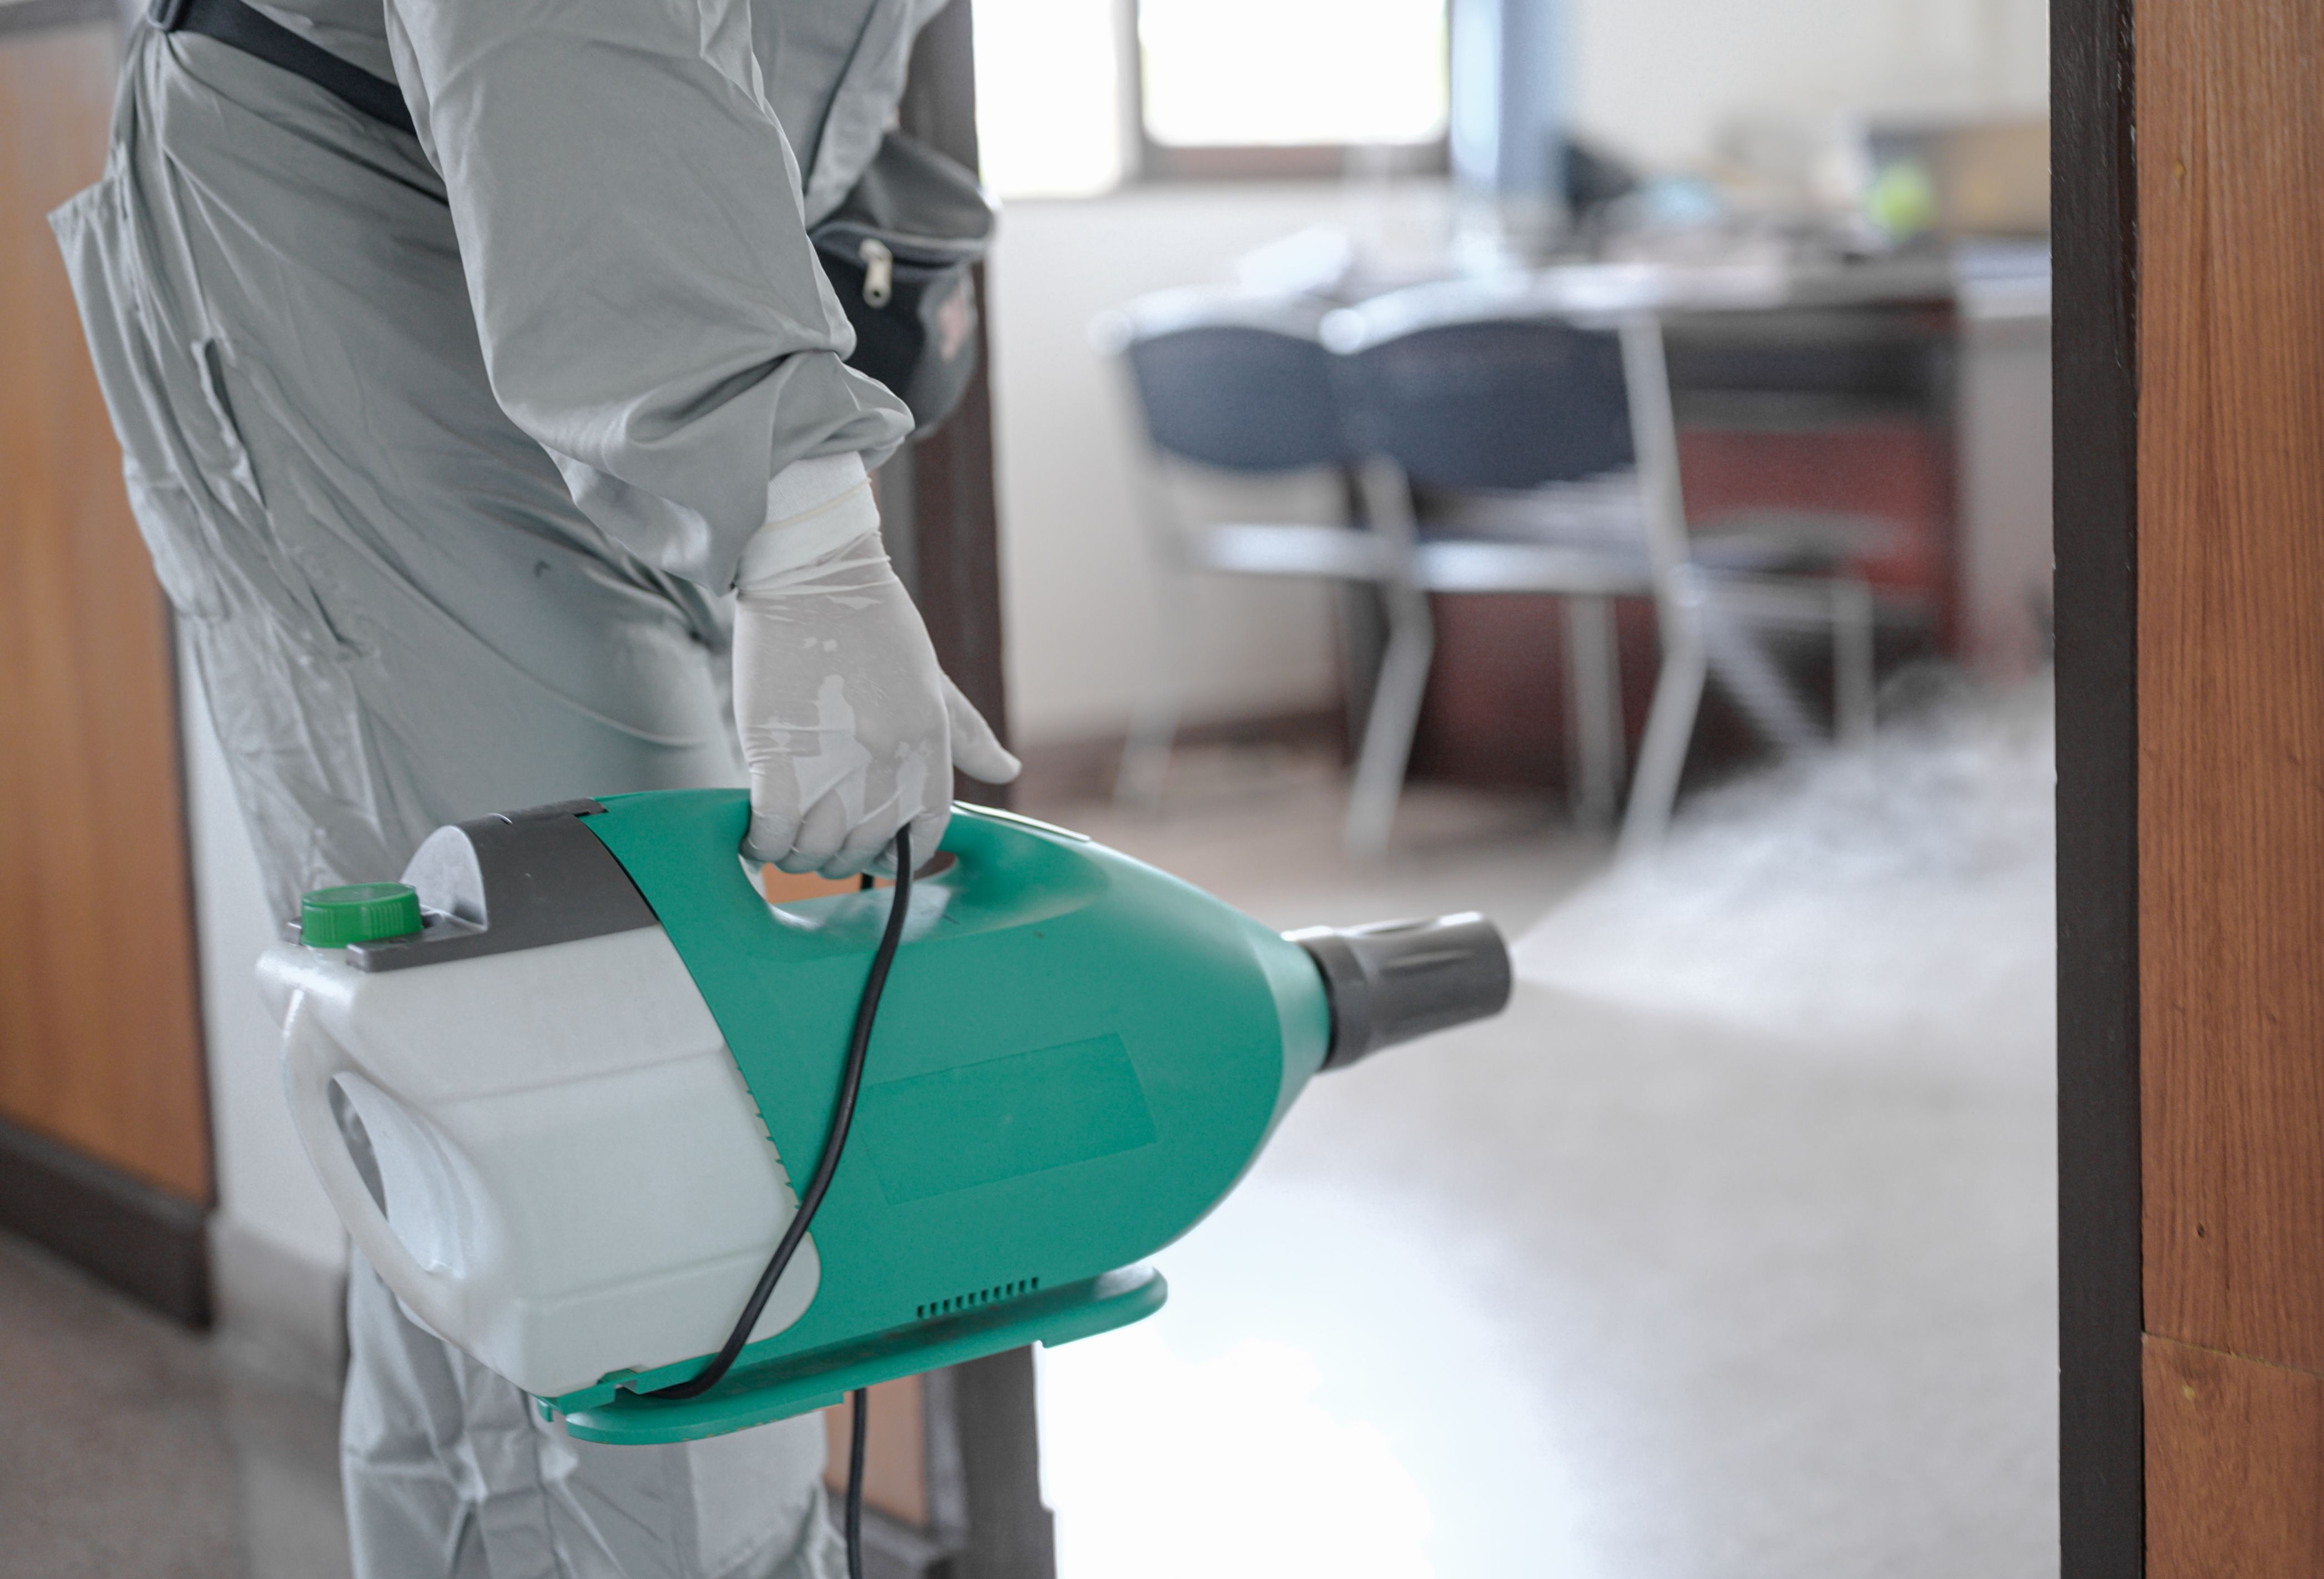 Professional Cleaning sanitizing Disinfecting